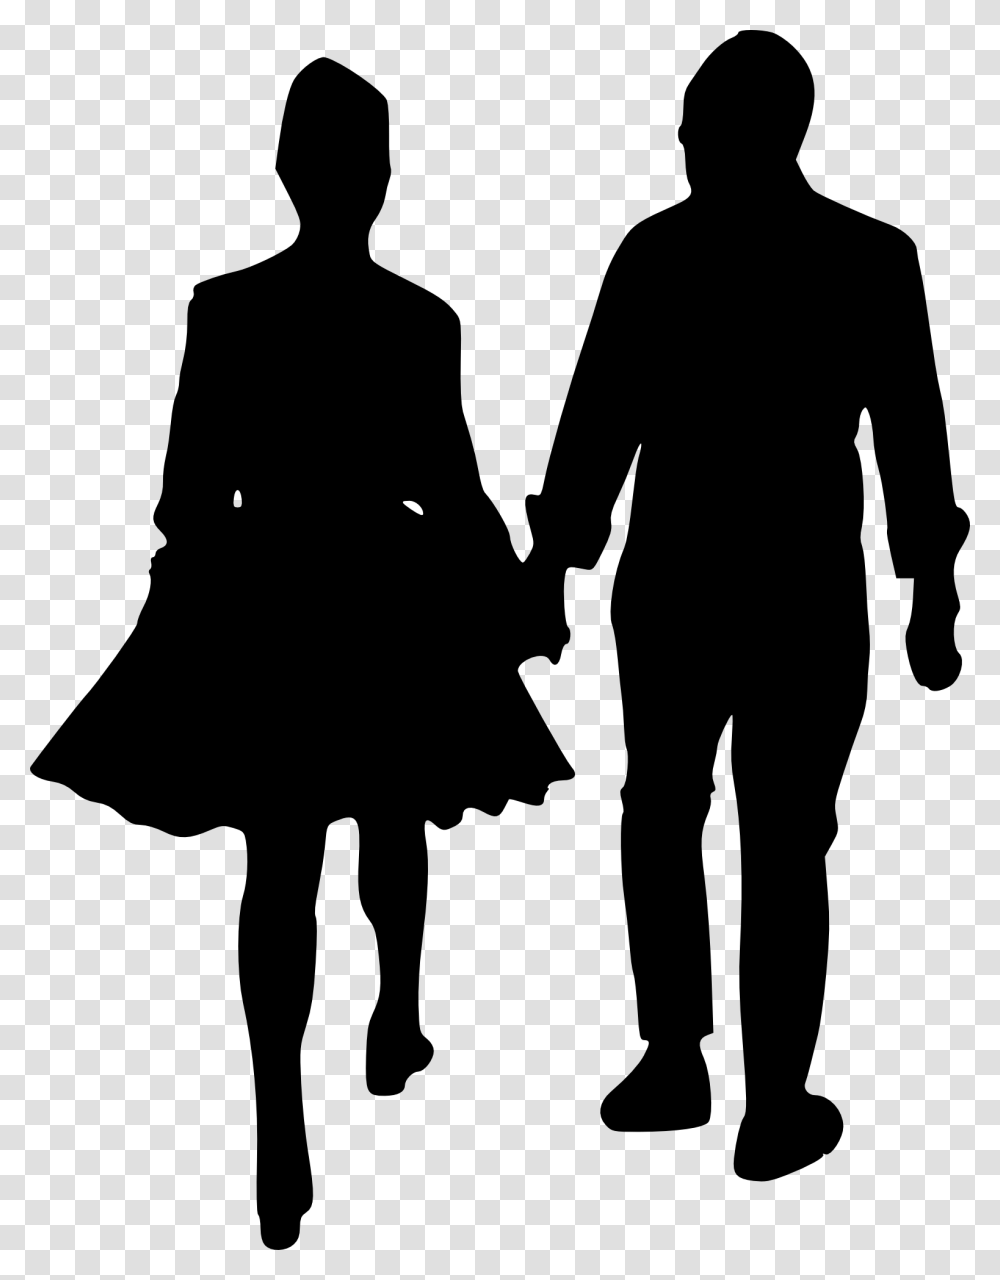 Clip Art Person Walking Silhouette People Walking Silhouette, Hand, Human, Holding Hands, Overcoat Transparent Png